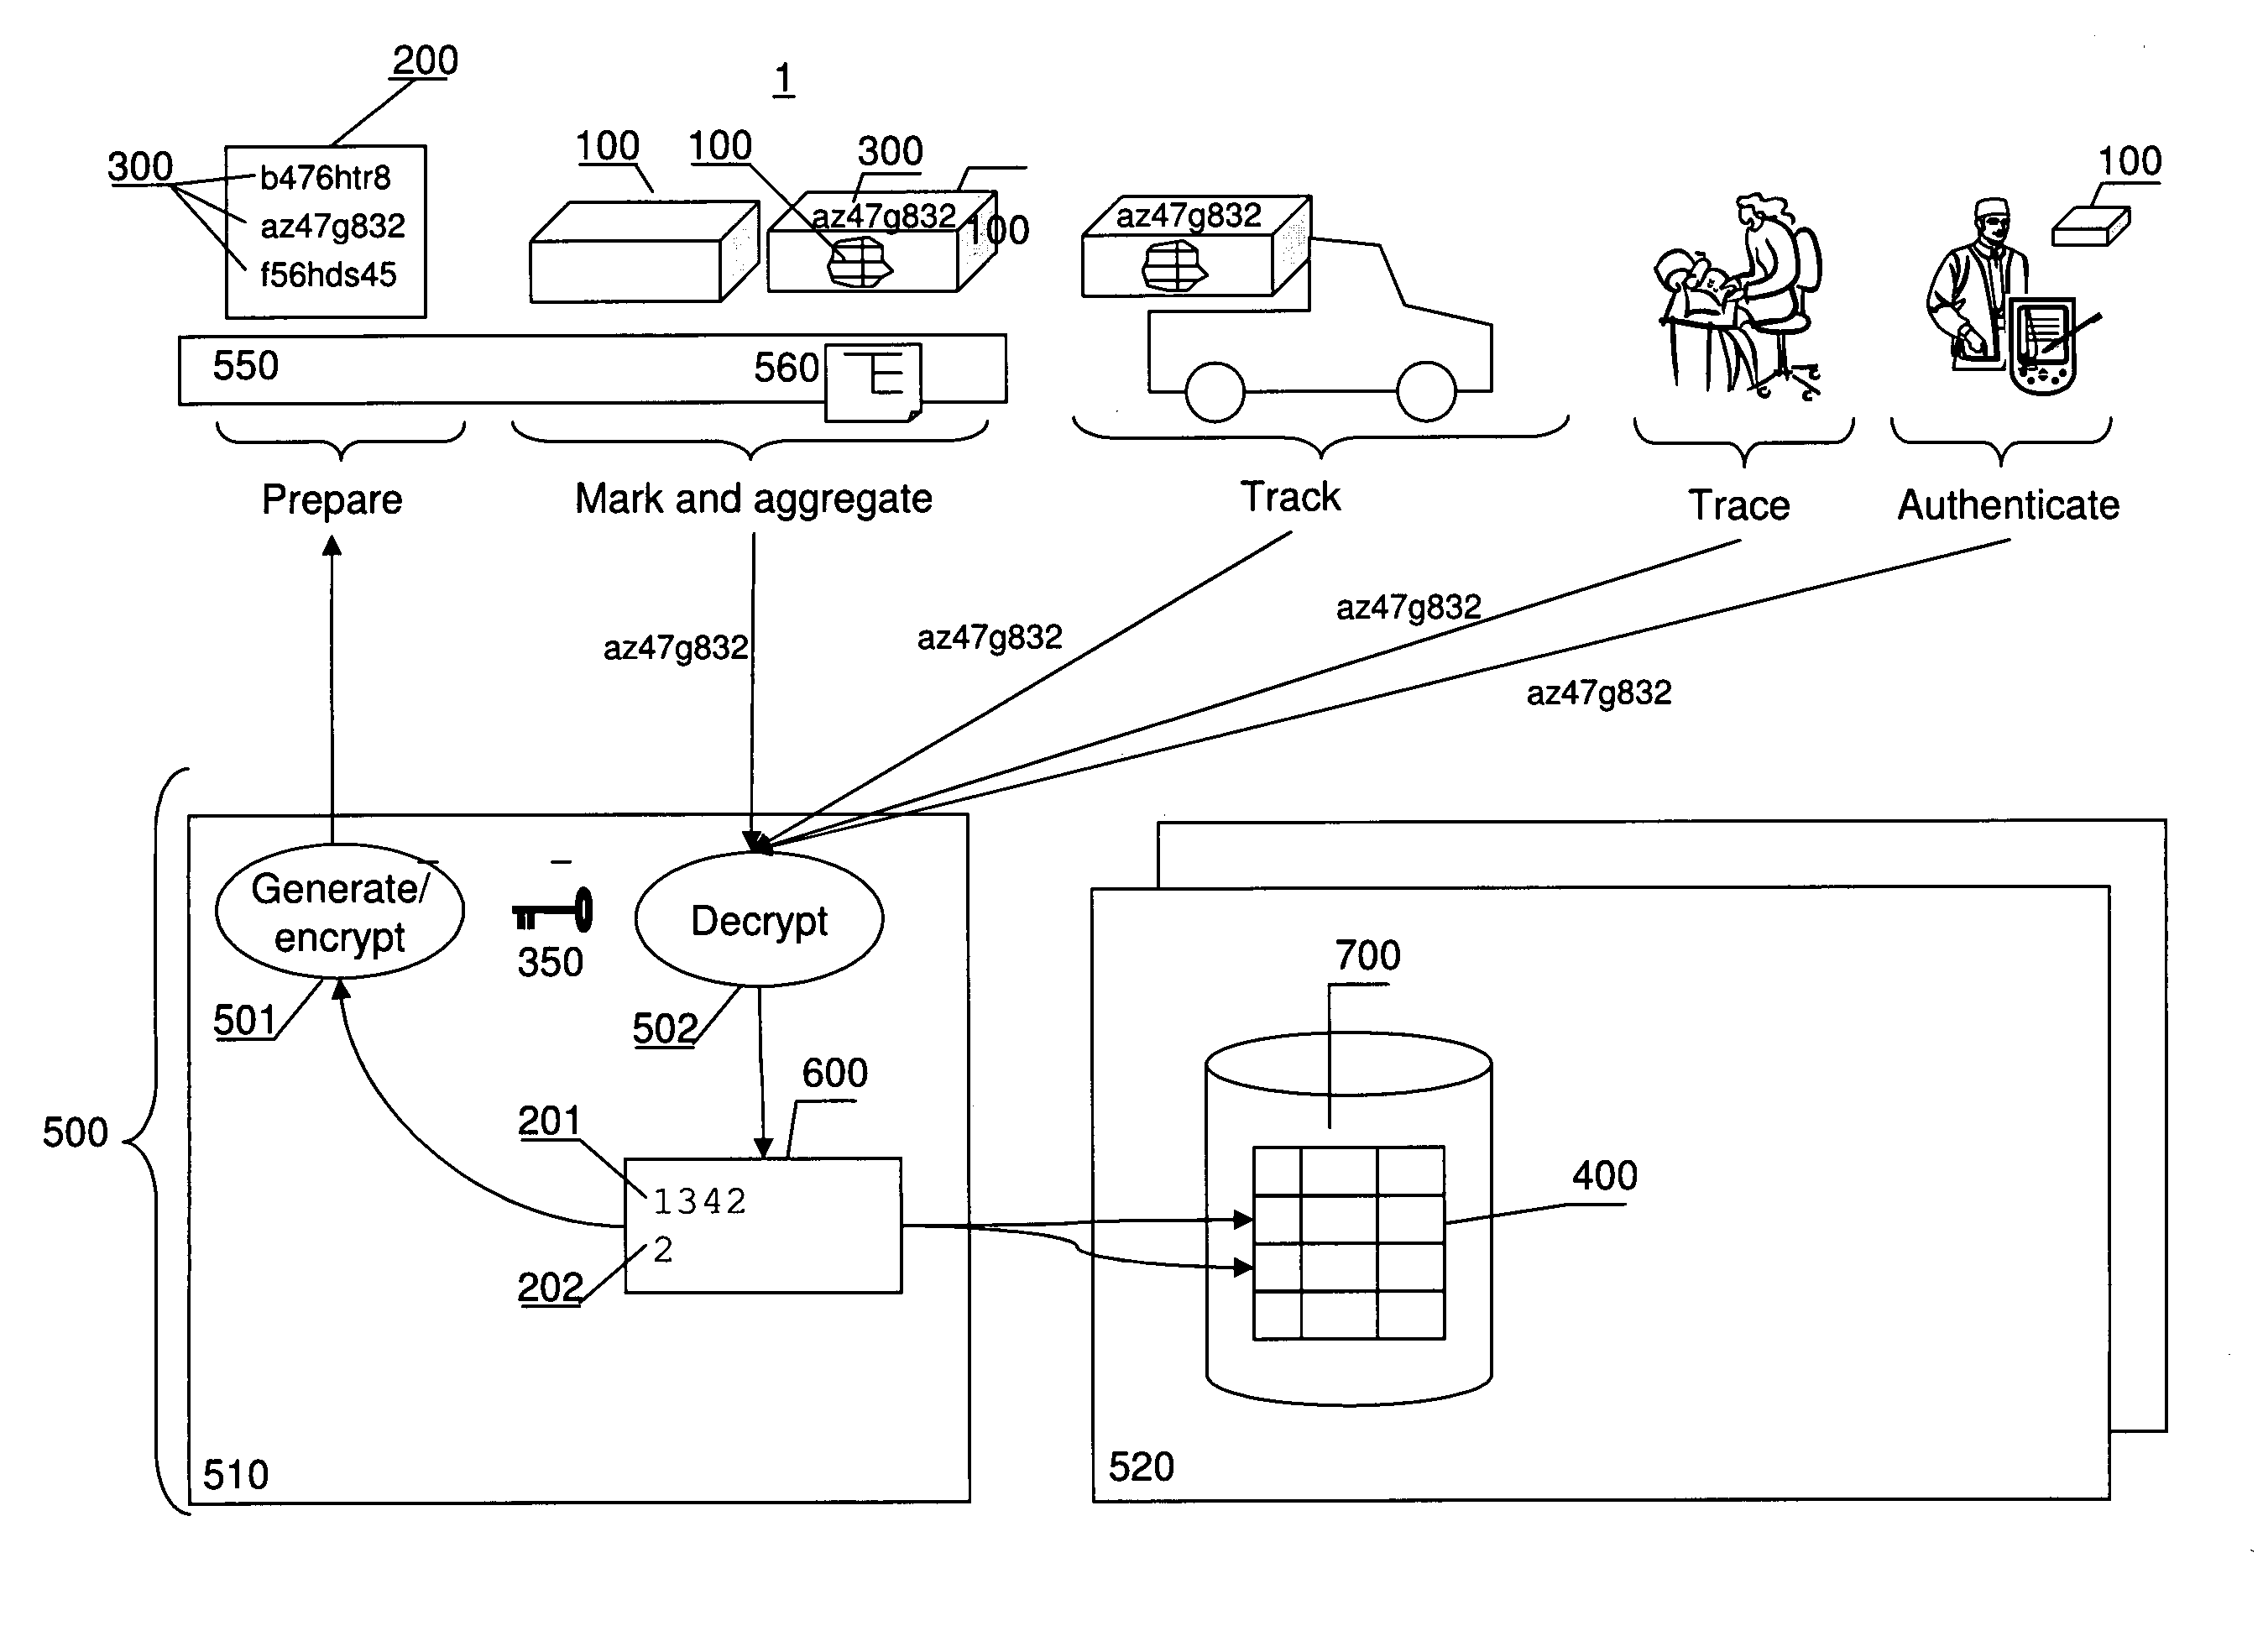 Method and system for storage and retrieval of track and trace information